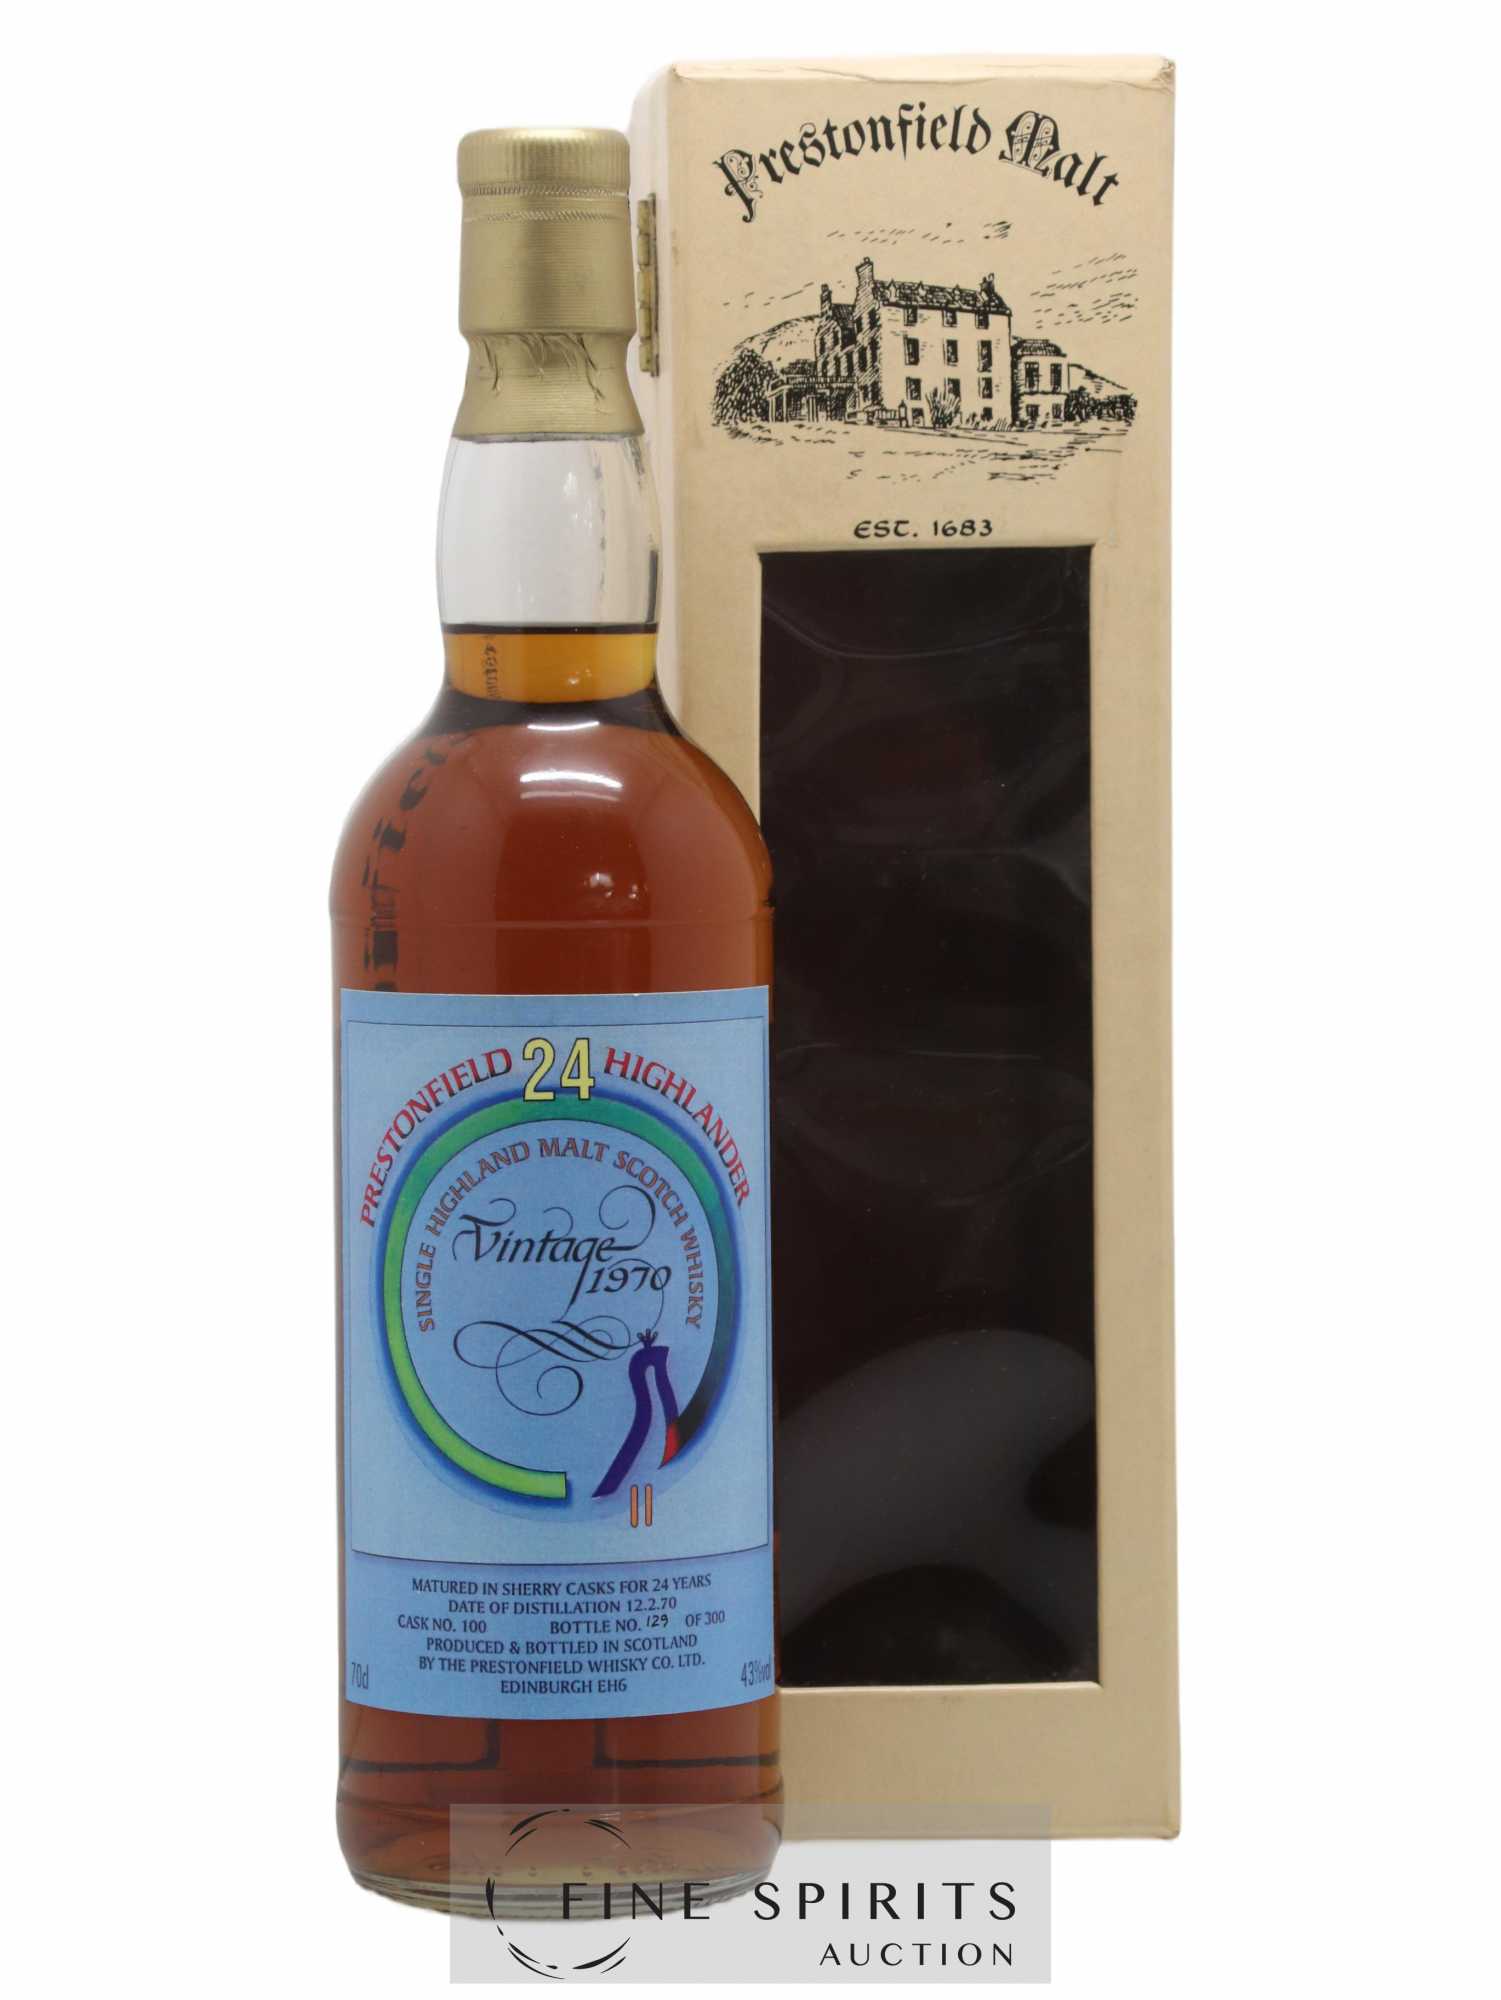 The Glendronach 24 years 1970 Of. The Prestonfield Sherry Cask n°100 - One of 300